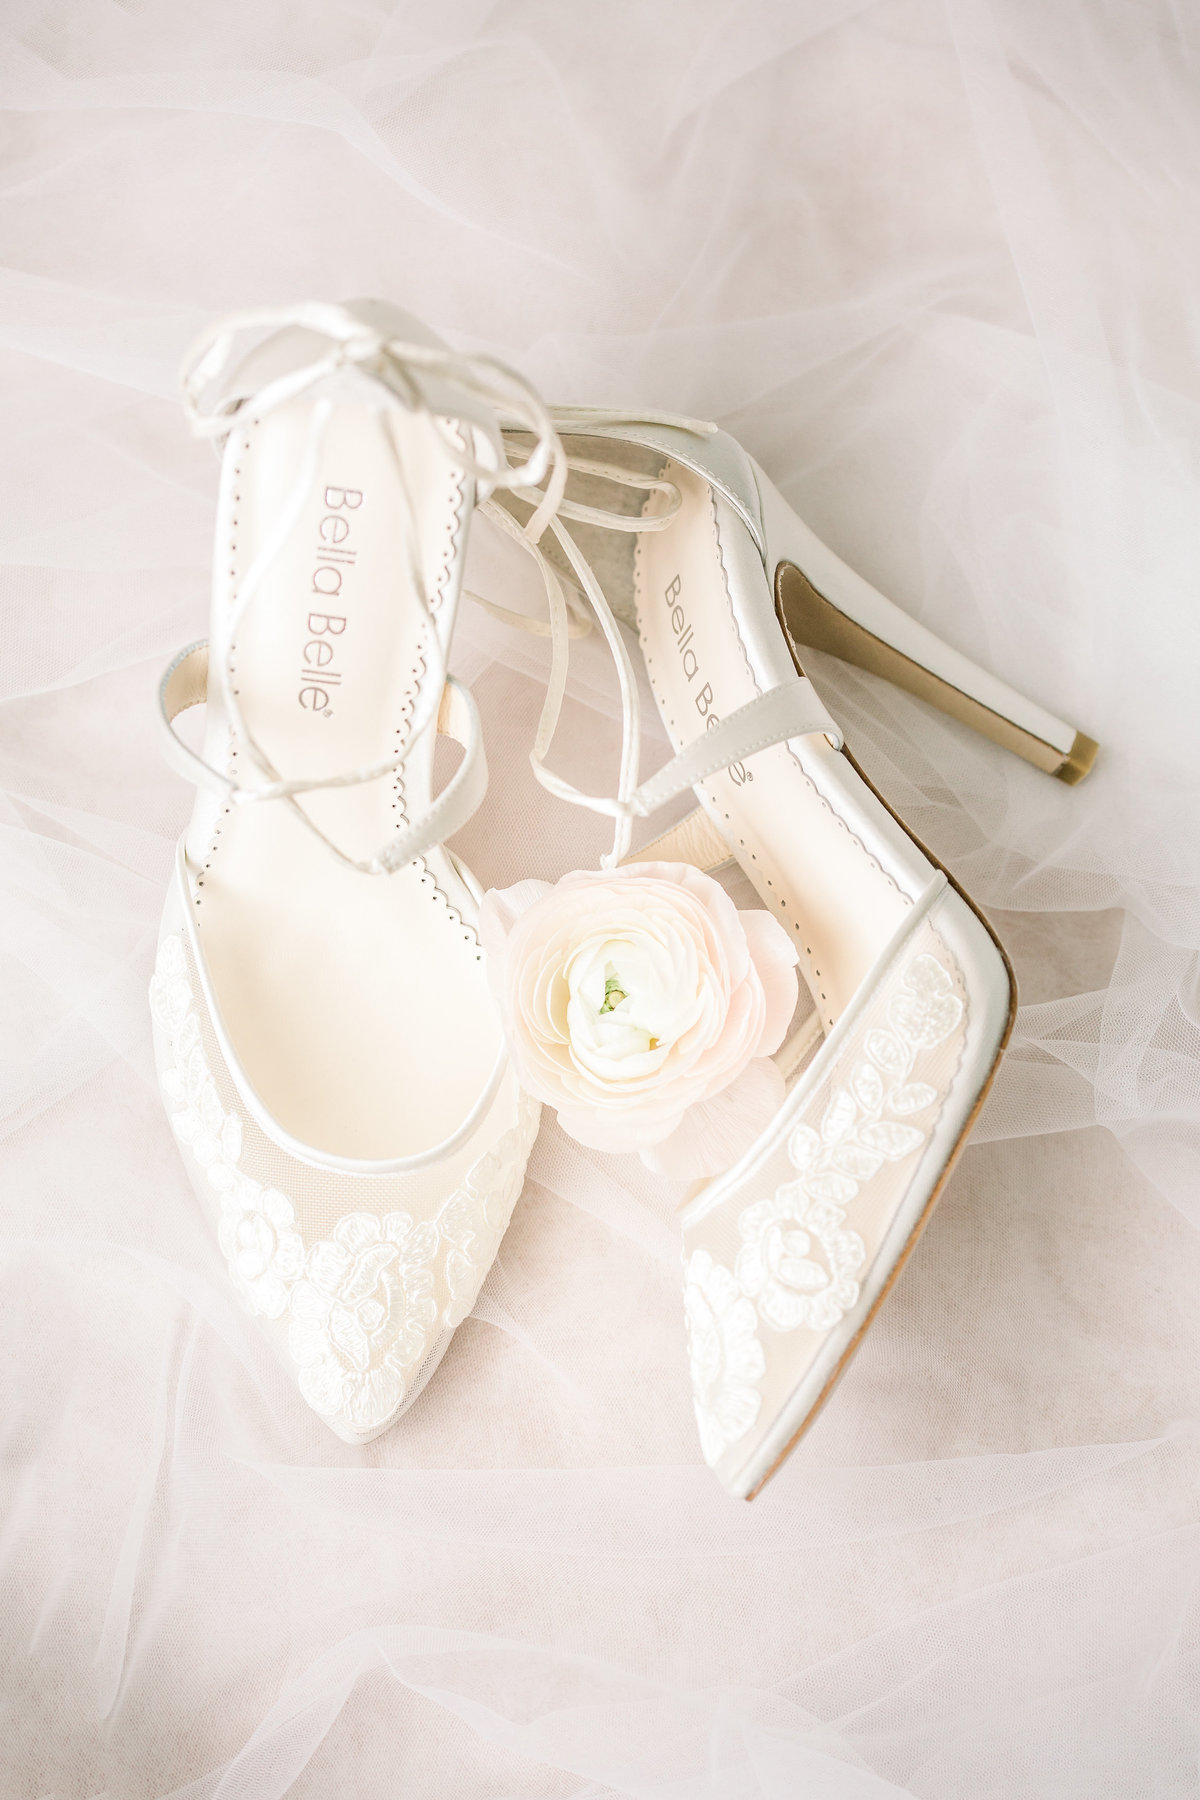 Bridal shoes and floral arrangement at Lowndes Grove by Karen Schanely.